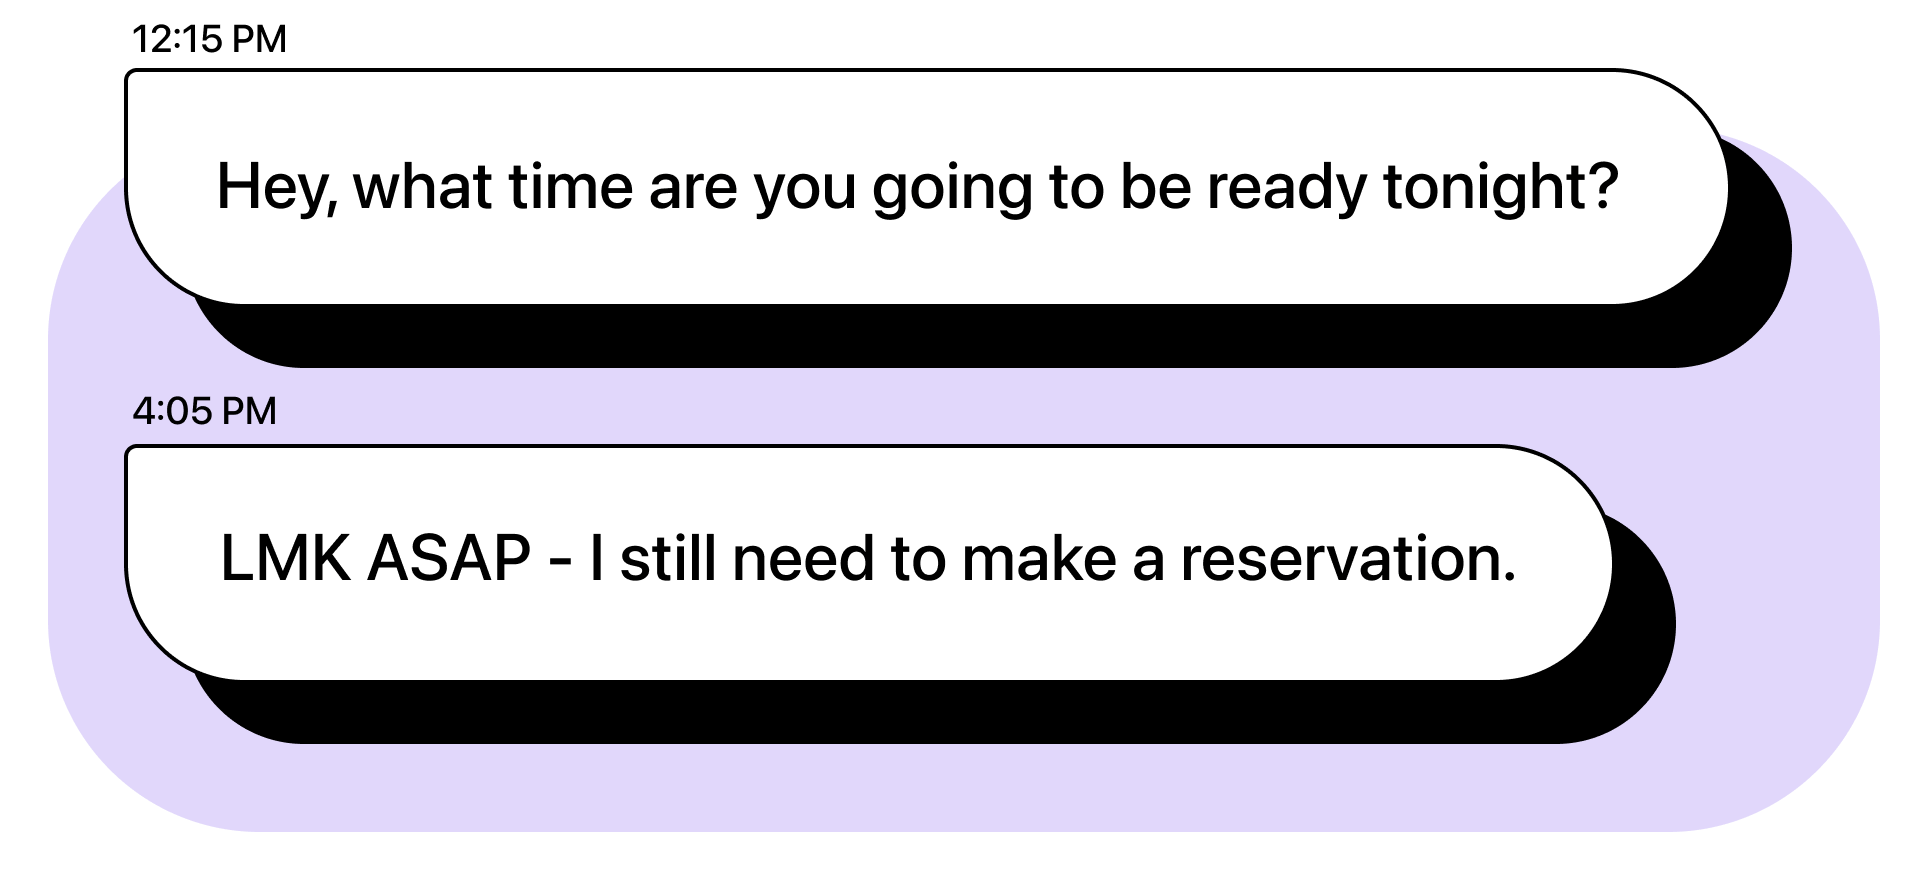 Illustration with chat bubbles. First chat bubble: "Hey, what time are you going to be ready tonight? [12:15 PM]". Second chat bubble: "LMK ASAP - I still need to make a reservation. [4:05 PM]"